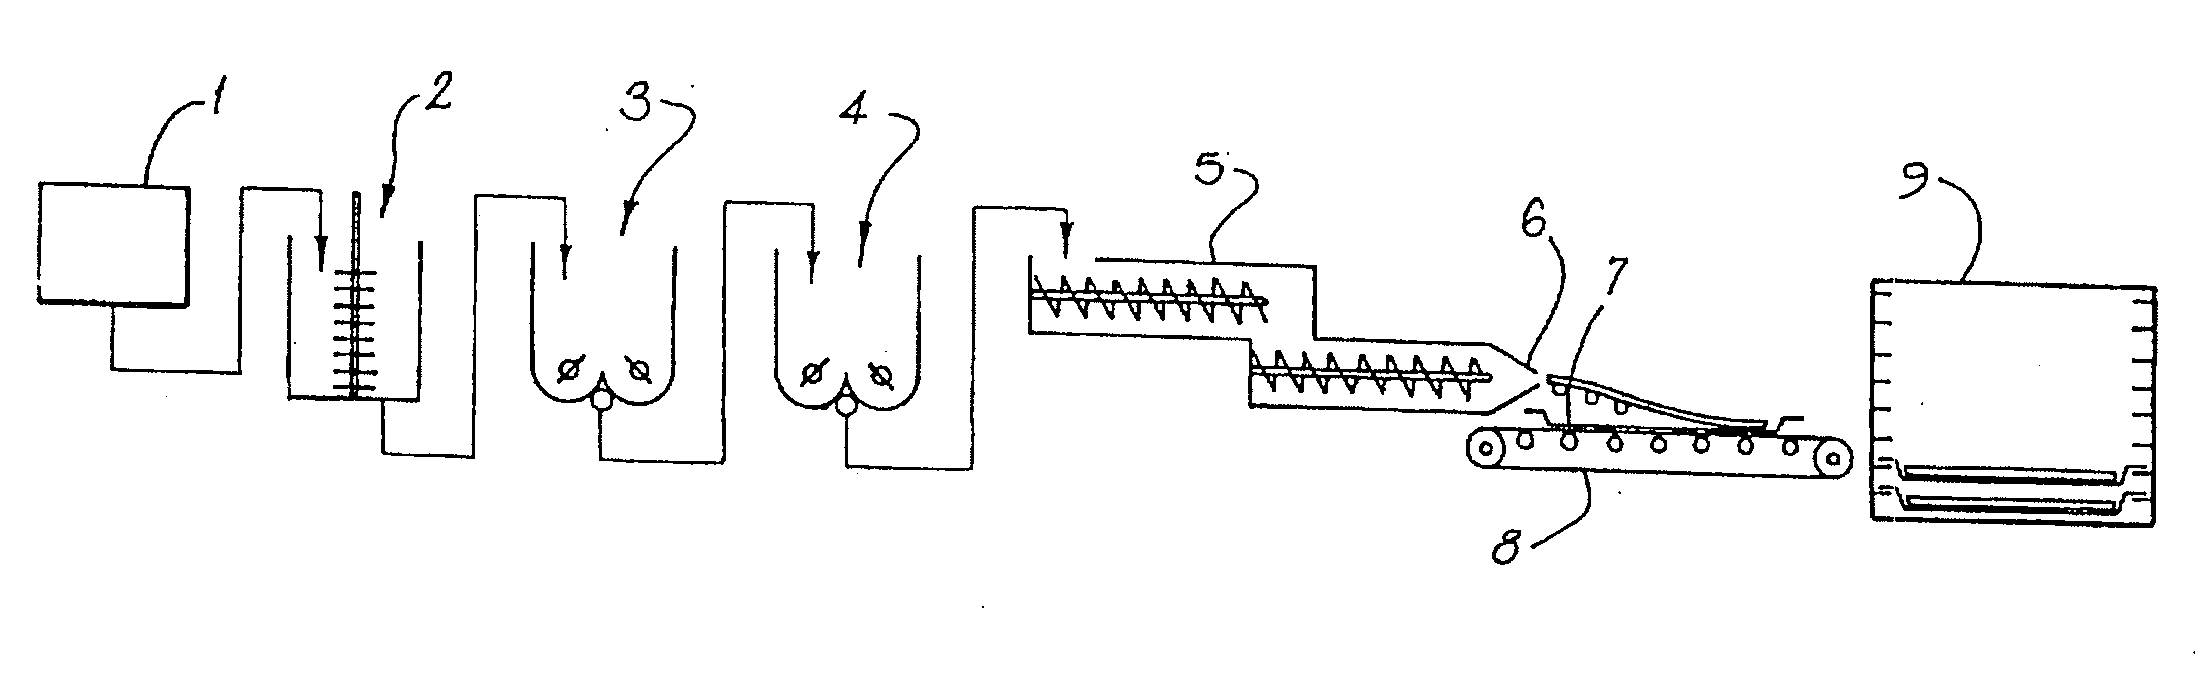 Method and Apparatus for Extruding Cementitious Articles